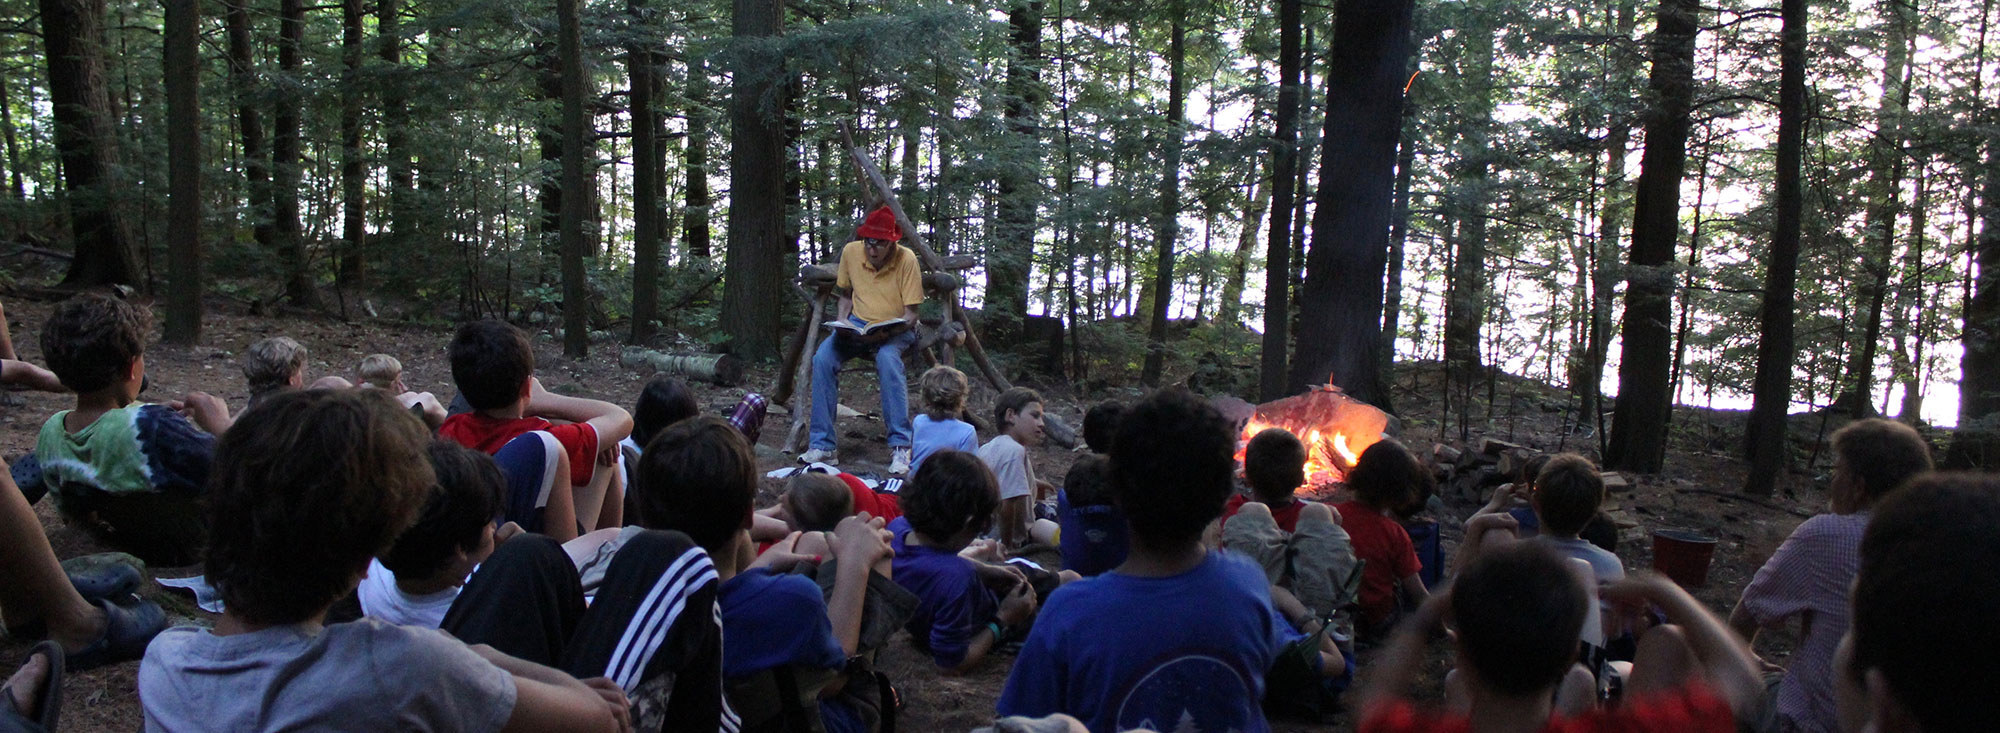 NCC Counselor talking to group of campers in the evening